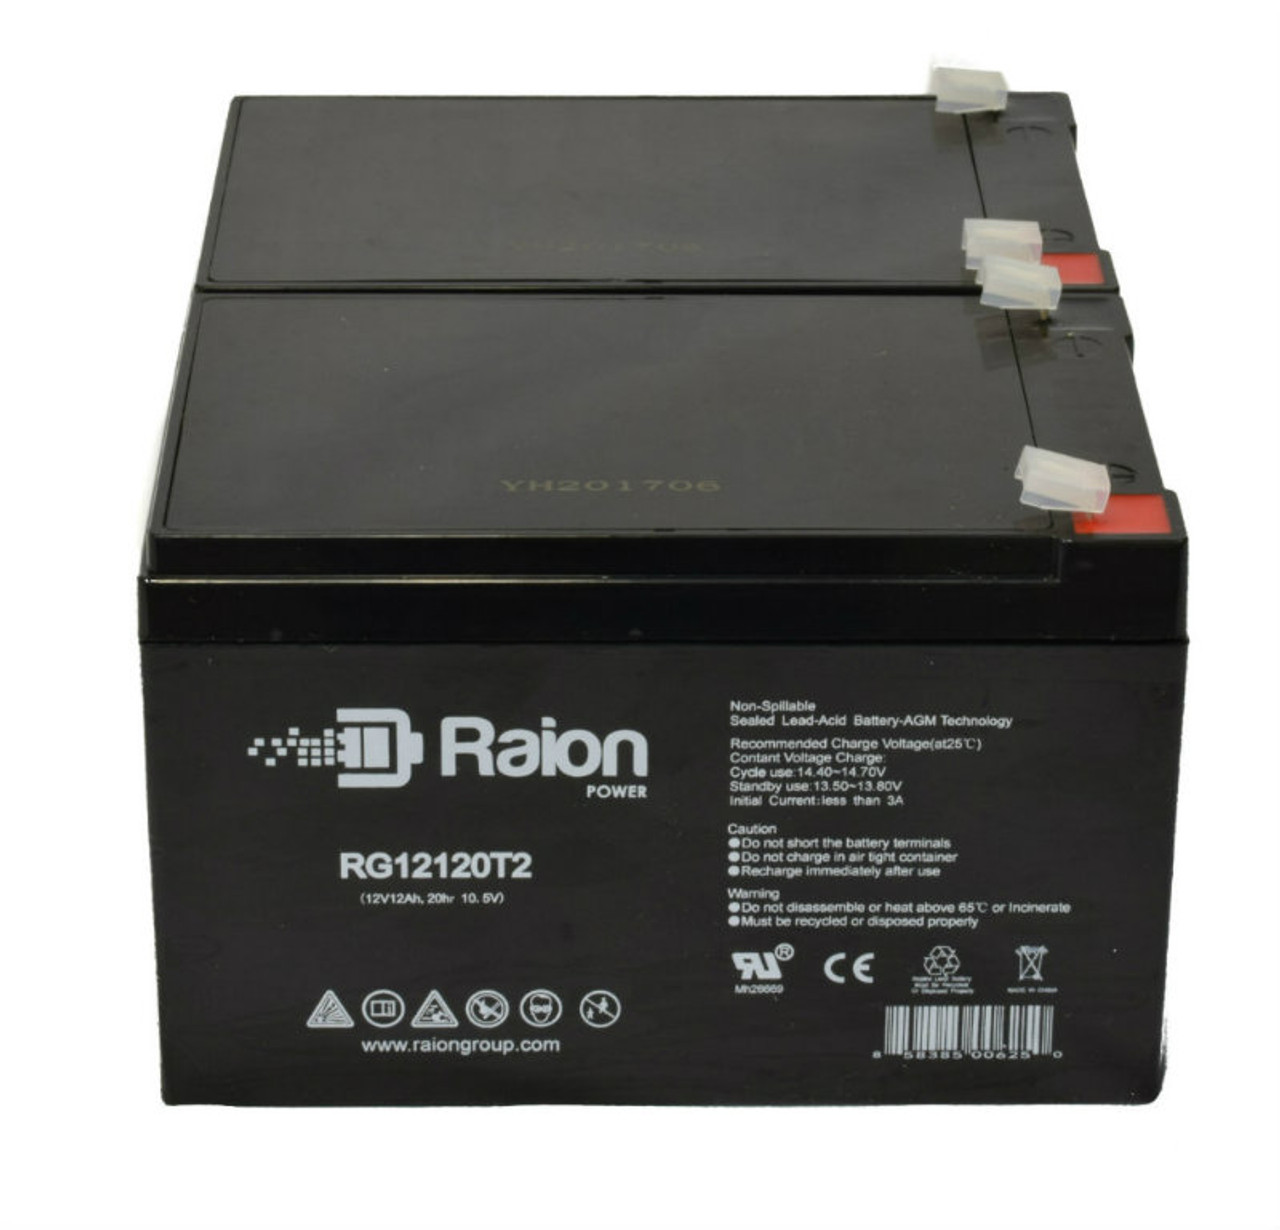 Raion Power RG12120T2 Replacement Fire Alarm Control Panel Battery for Altronix AL842UL2ADA - 2 Pack